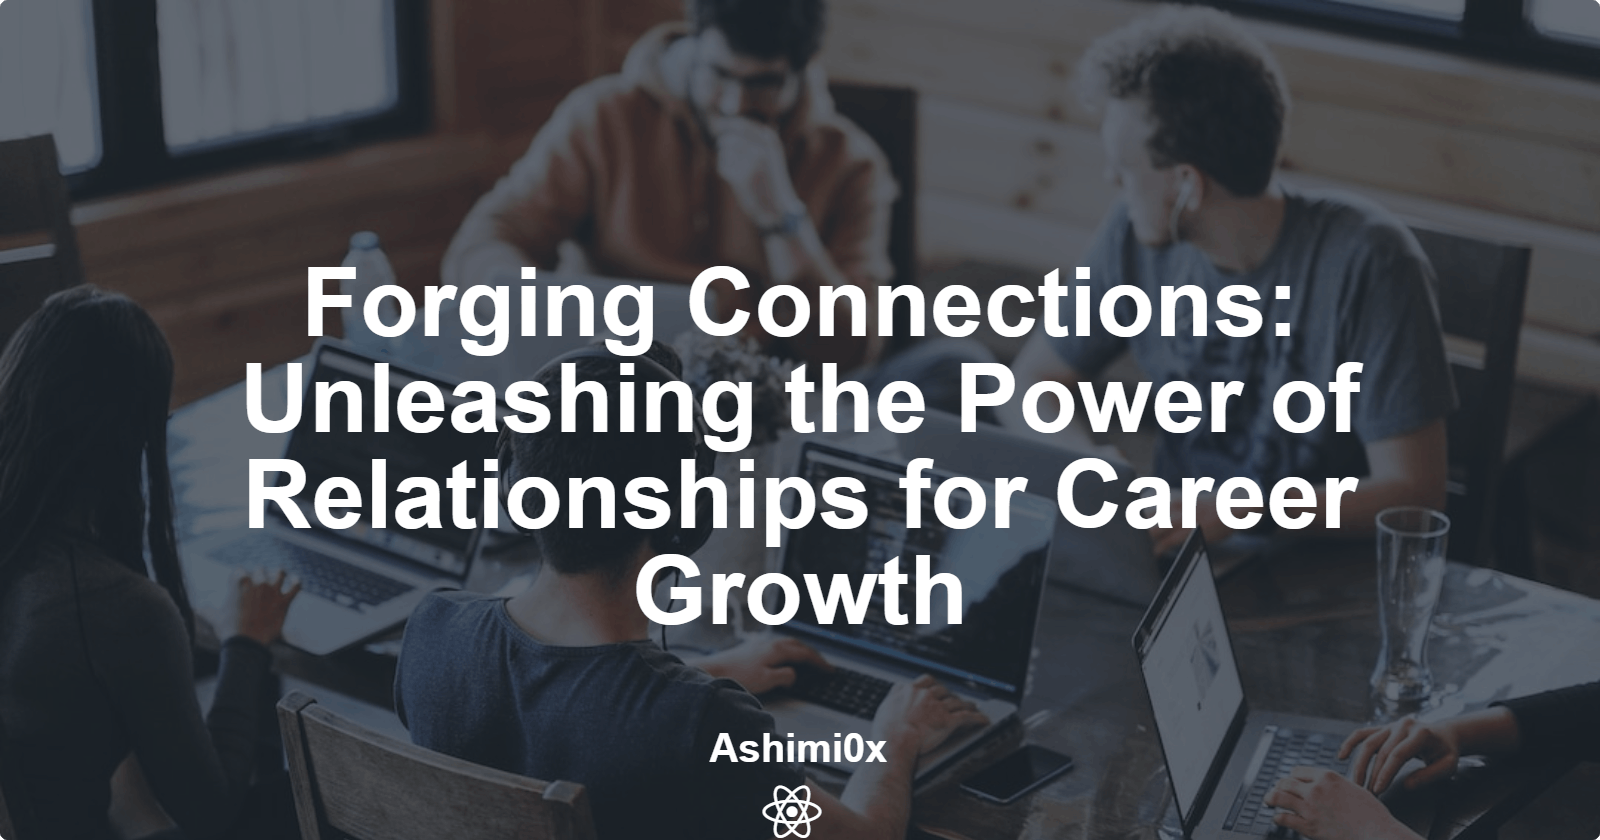 Forging Connections: Unleashing the Power of Relationships for Career Growth